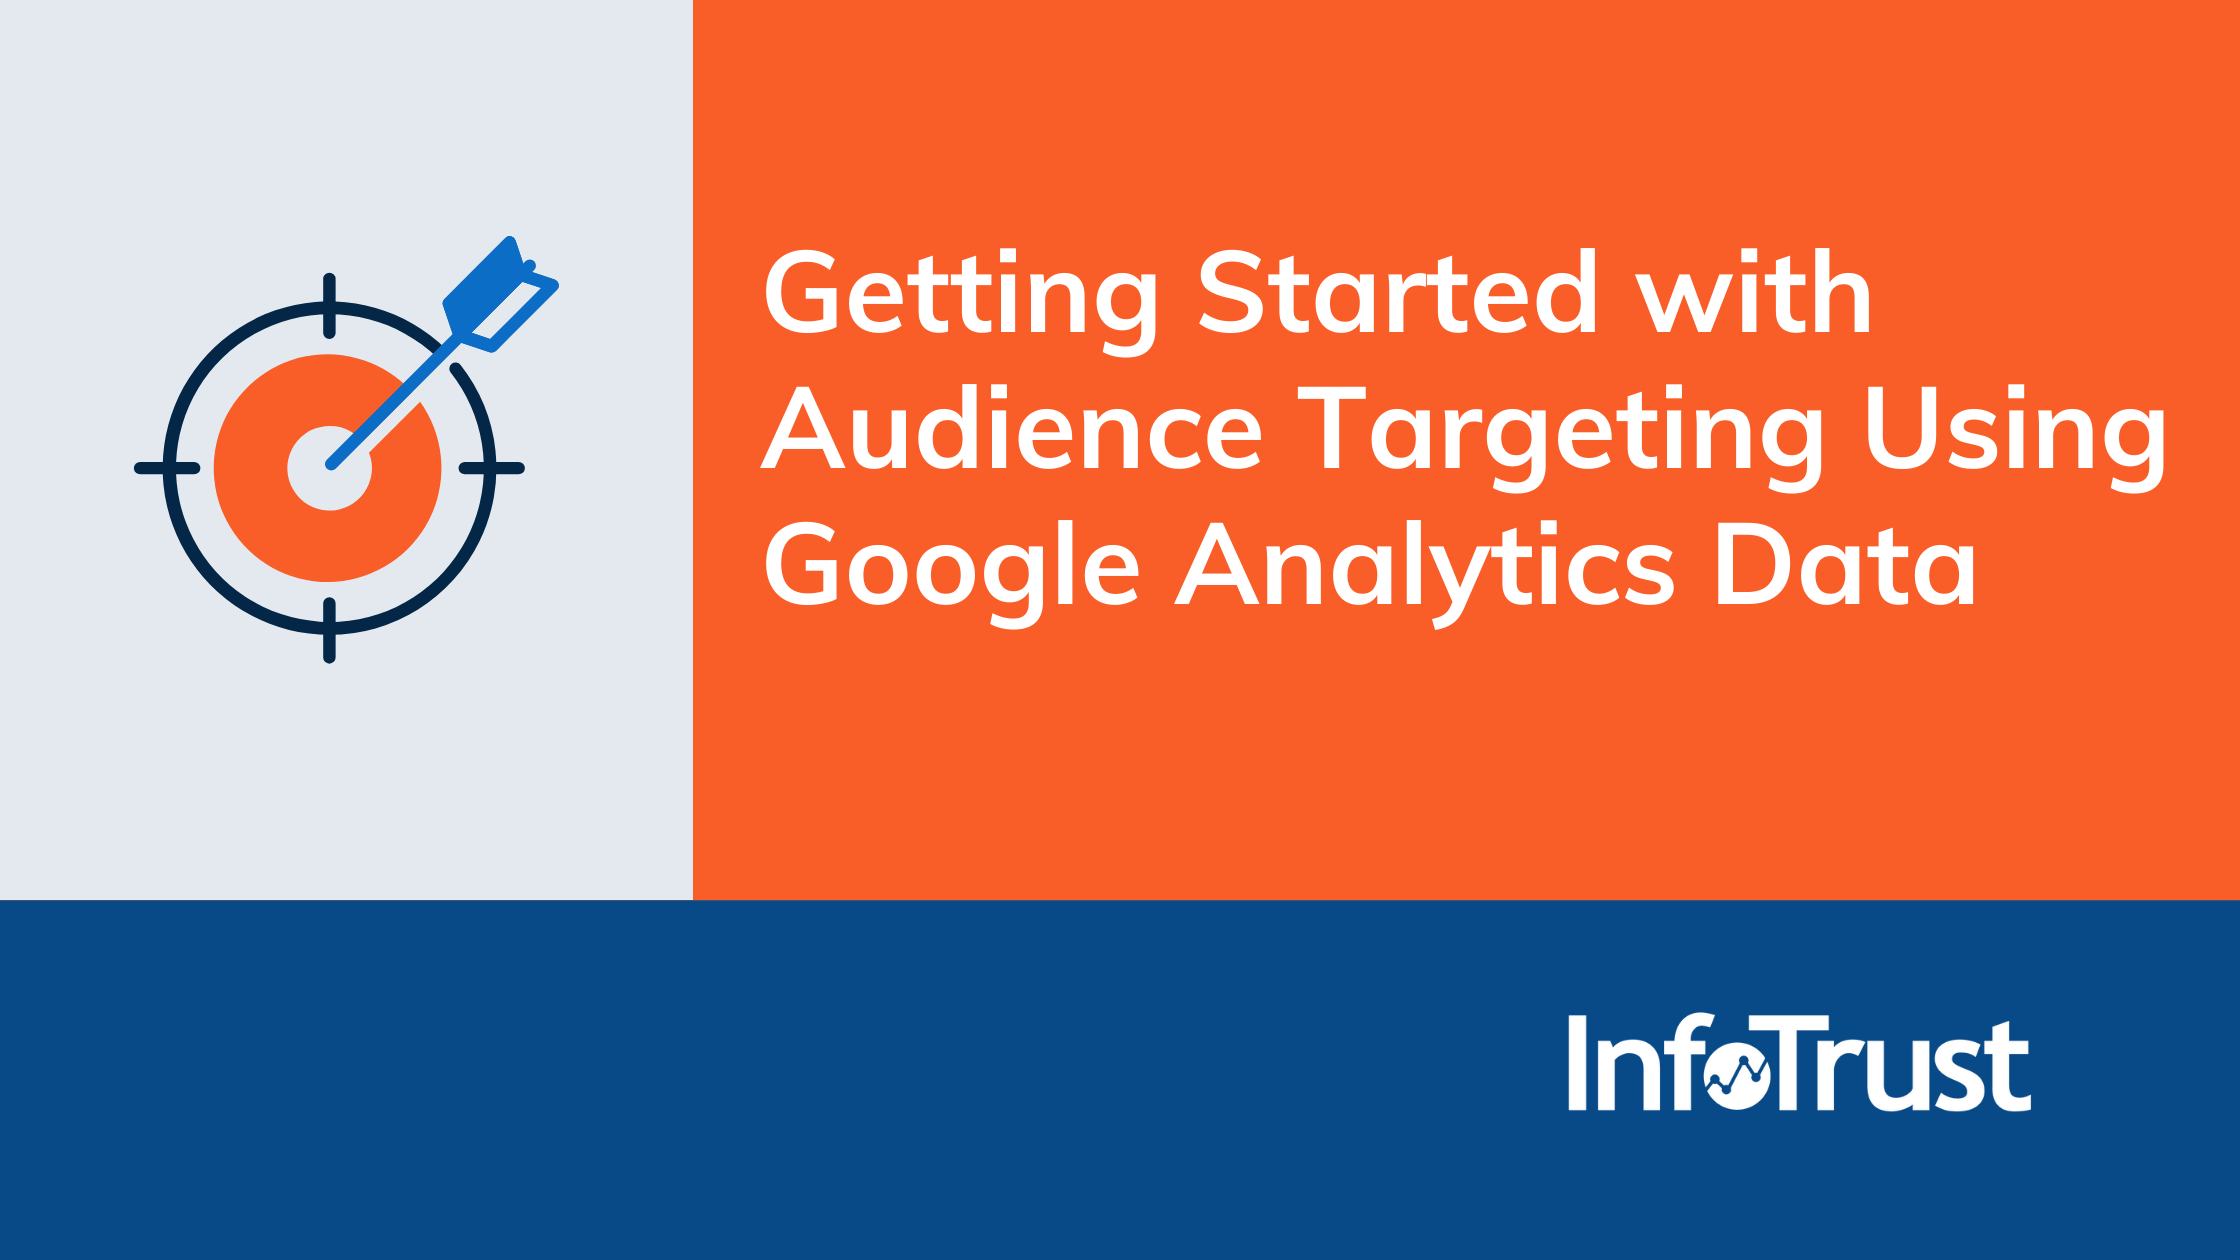 Getting Started with Audience Targeting Using Google Analytics Data